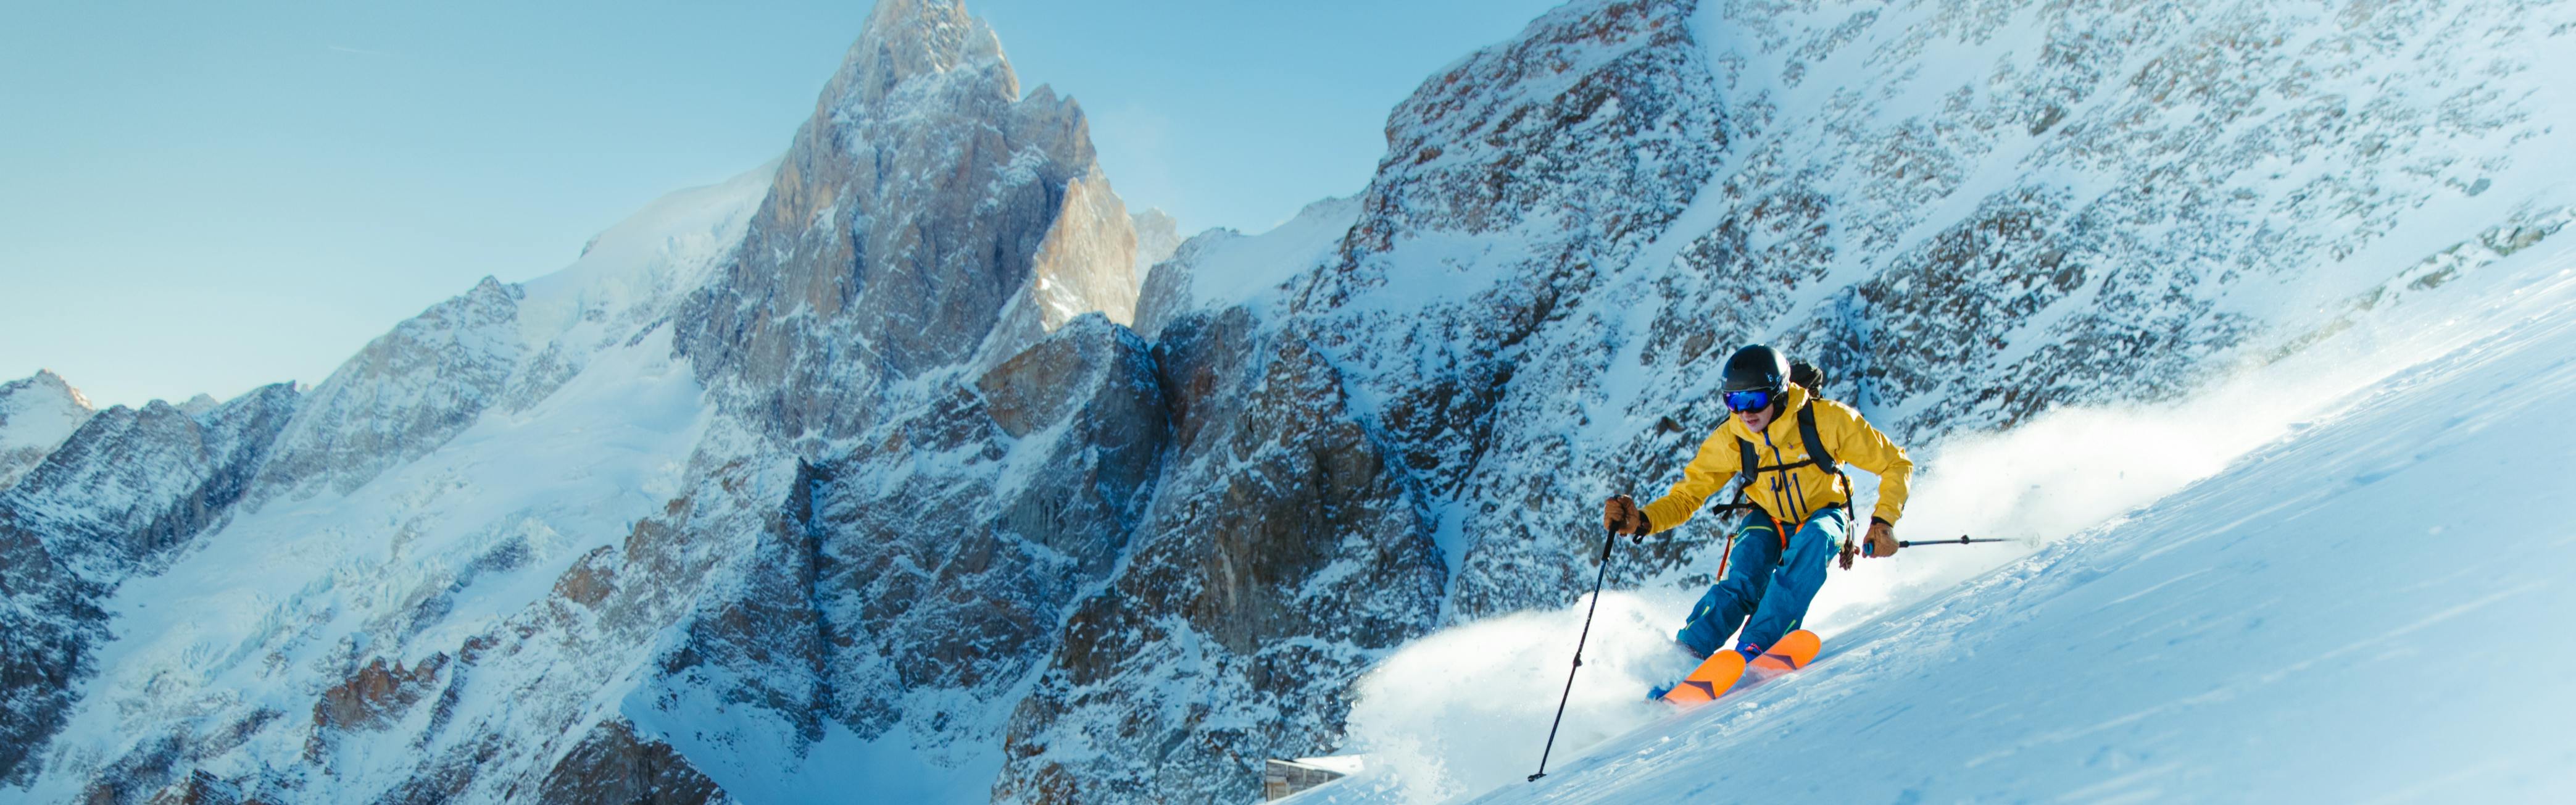 Skitouring buyer's guide: How to find the right skis